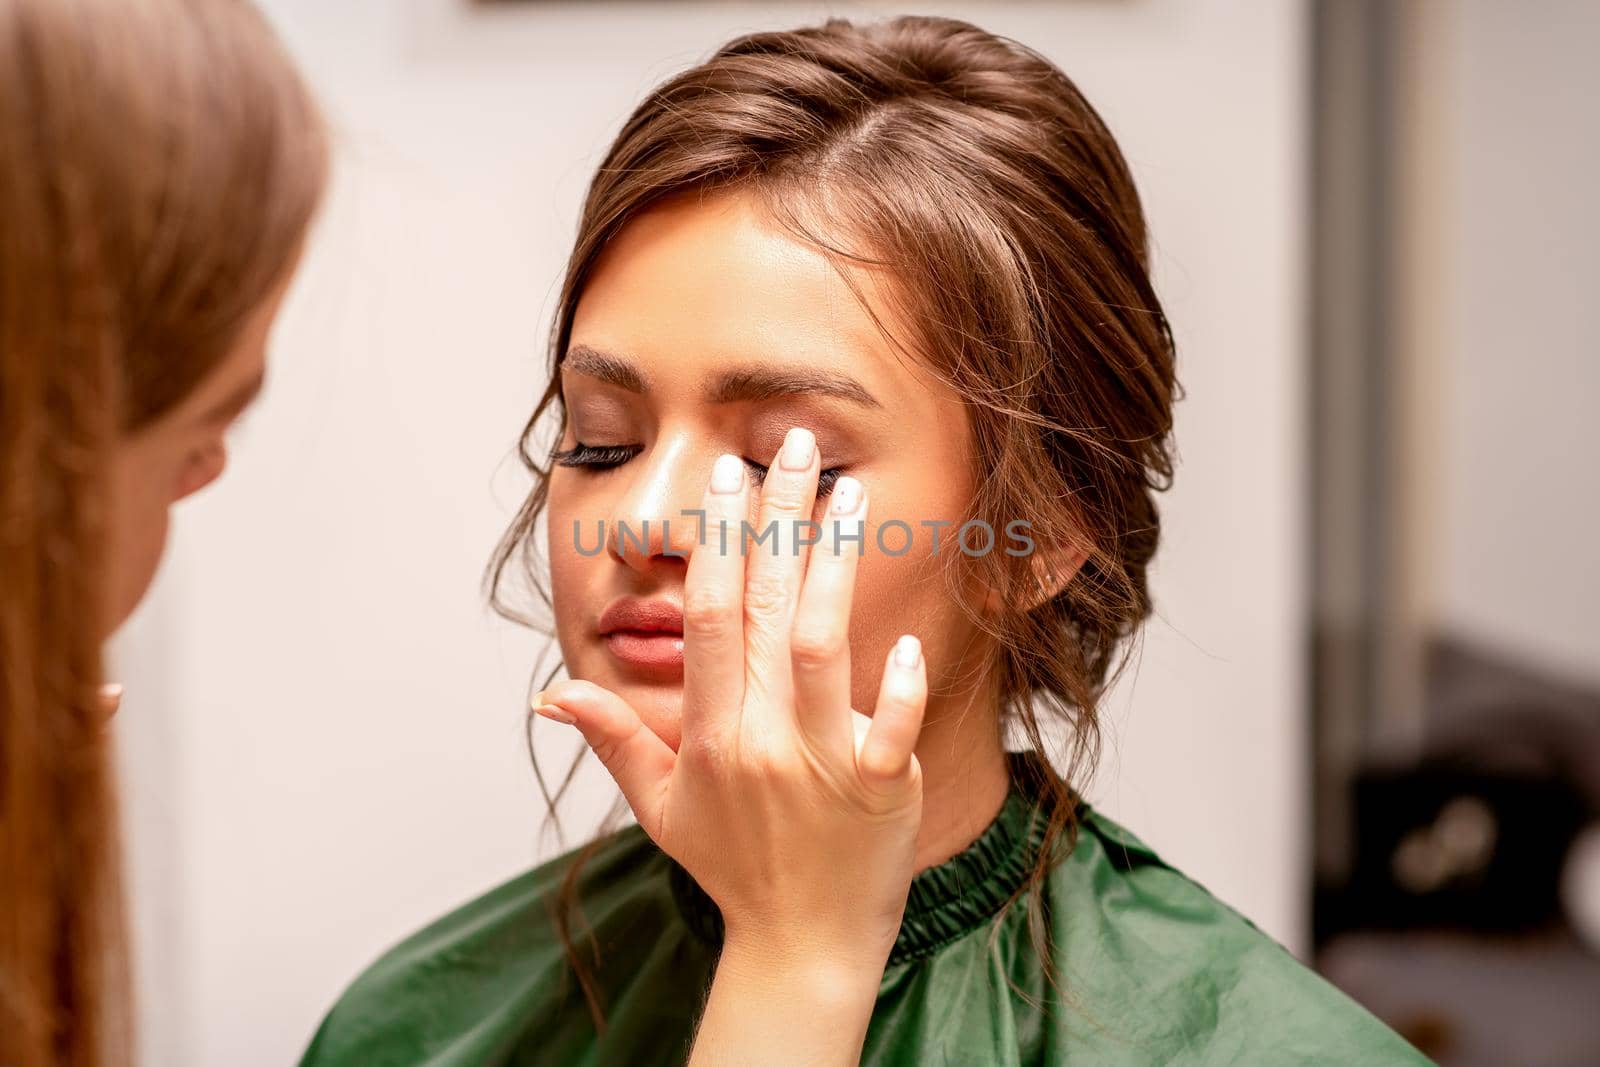 The hand of a makeup artist applies eye shadow on the eyelid of a young Caucasian woman with fingers in a beauty salon